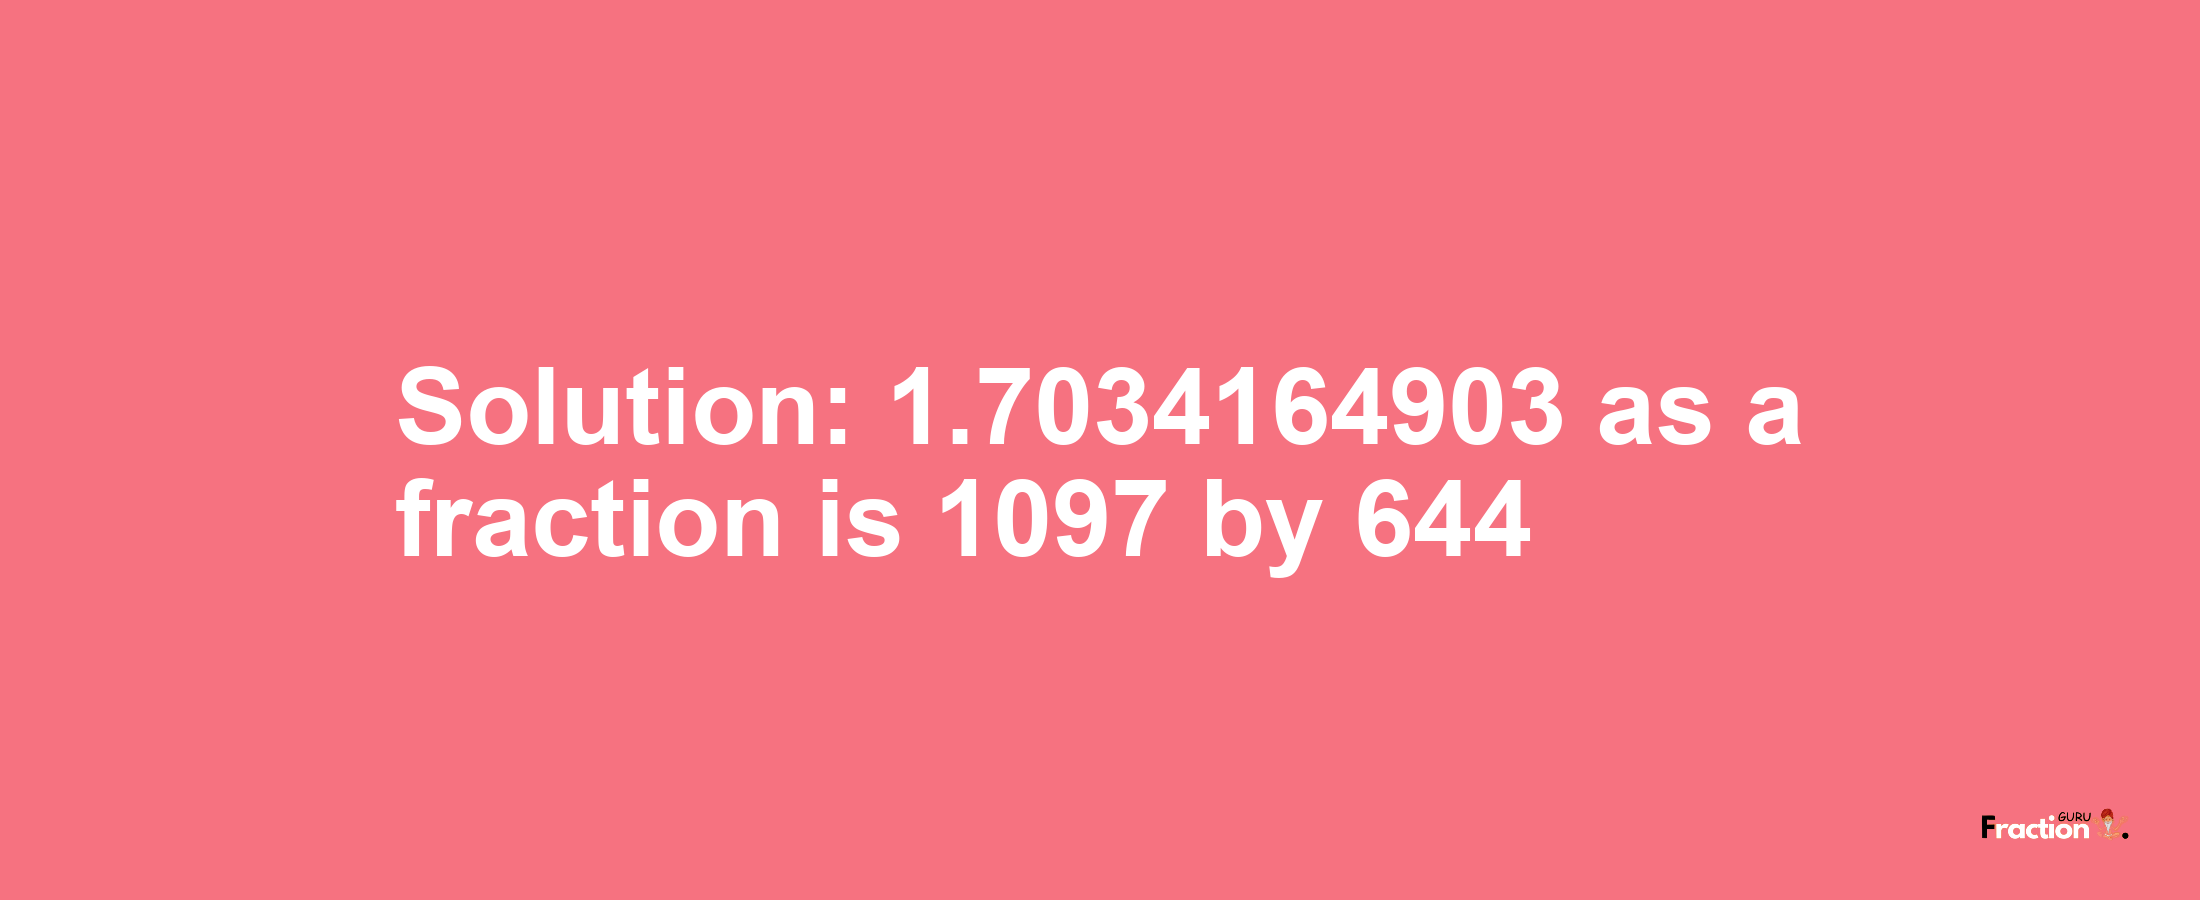 Solution:1.7034164903 as a fraction is 1097/644